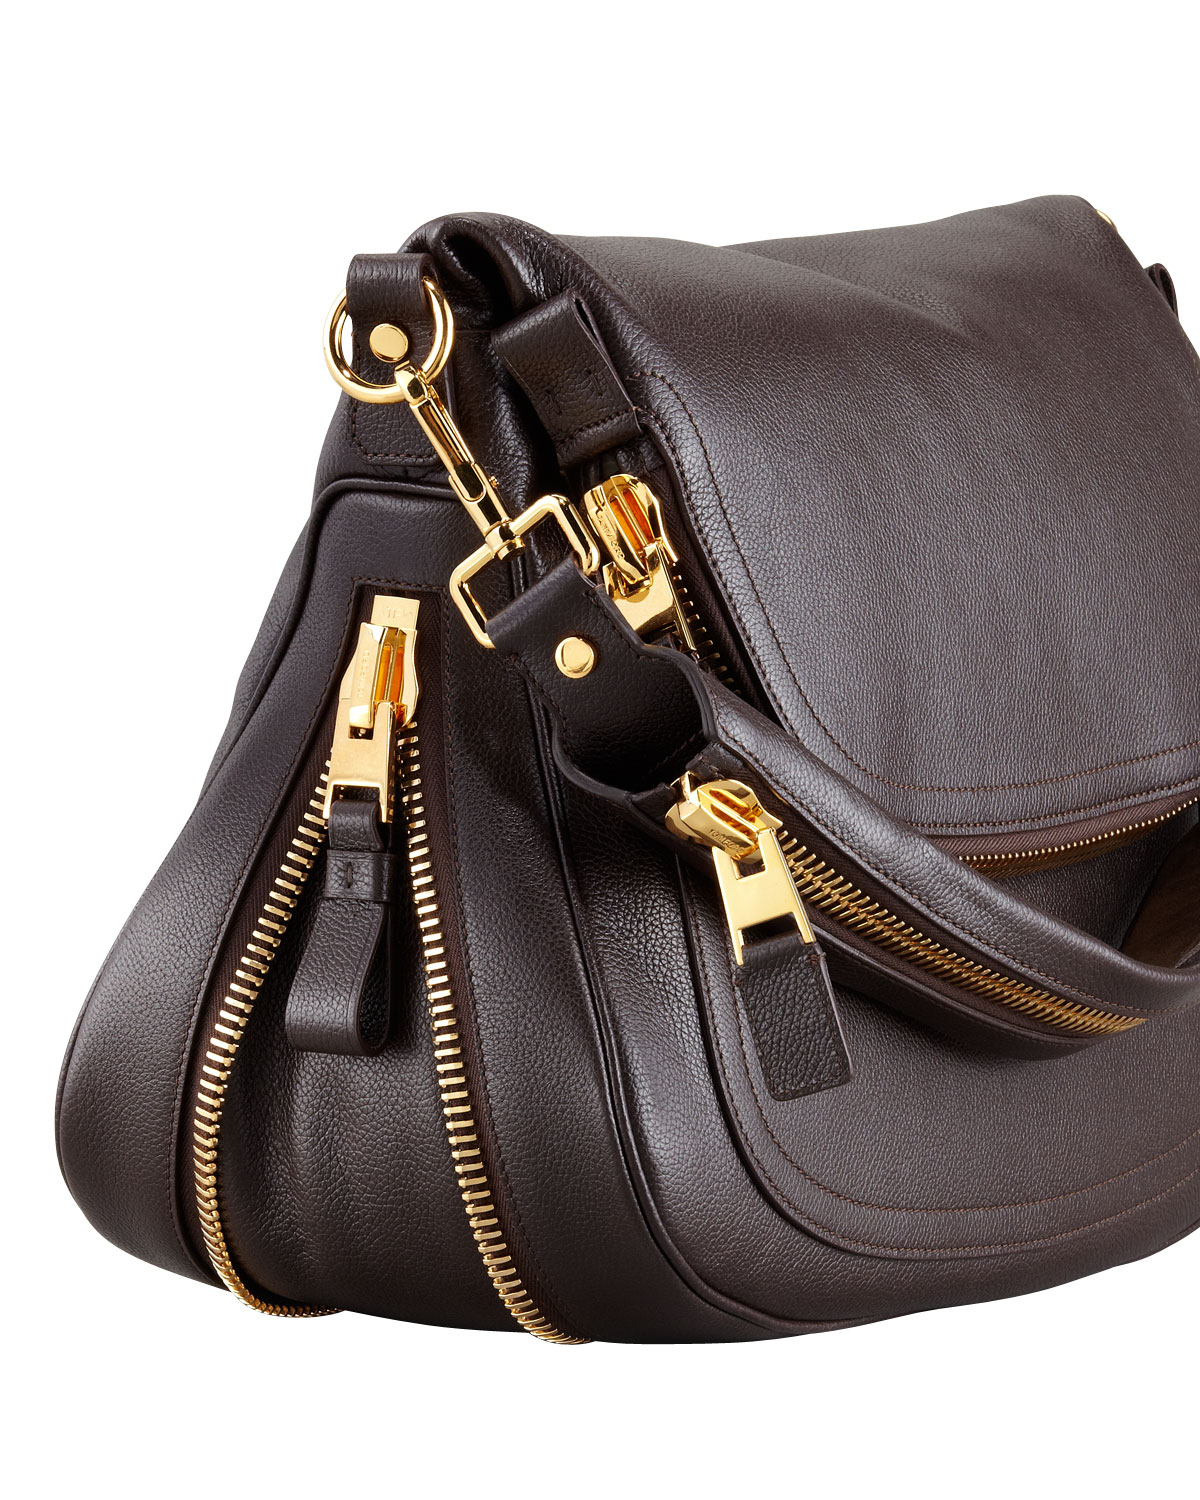 Tom Ford Jennifer Leather Shoulder Bag in Yellow (Brown) - Lyst